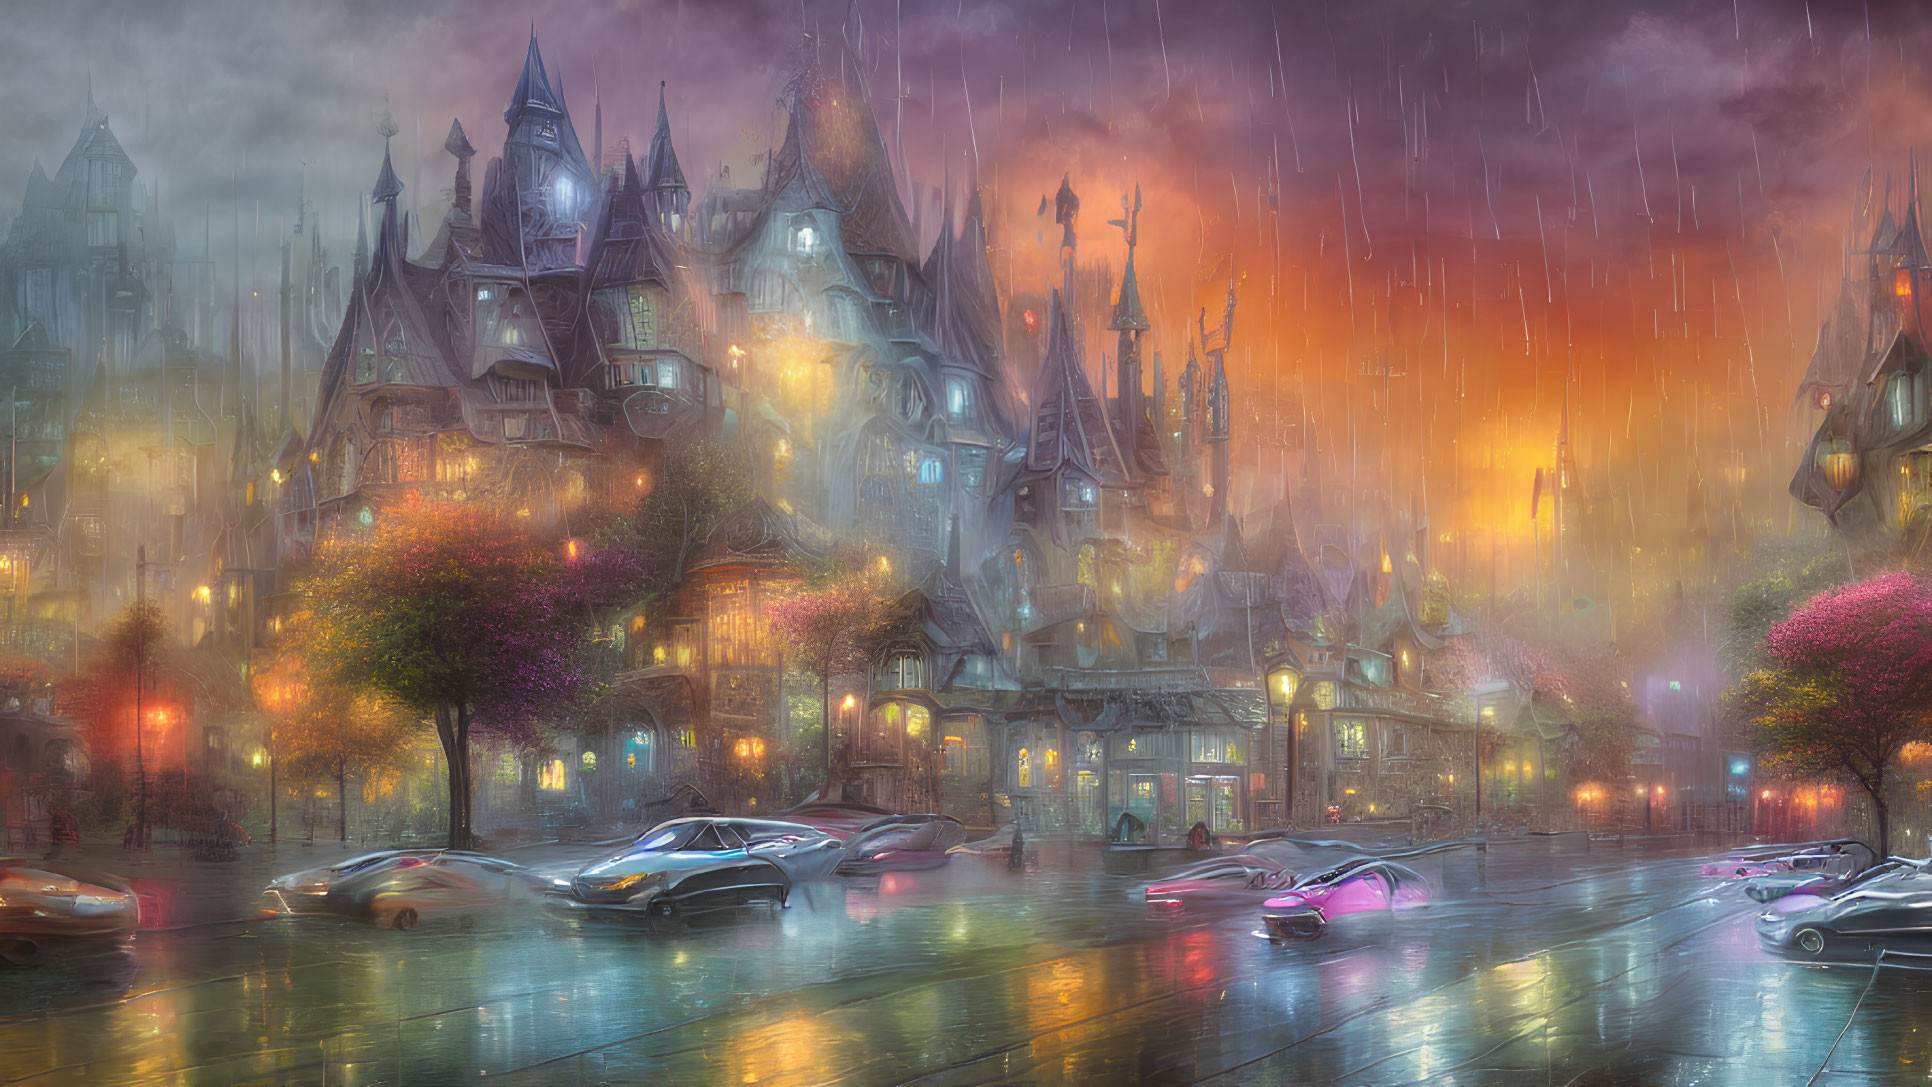 Futuristic cityscape with reflective wet street and gothic skyline